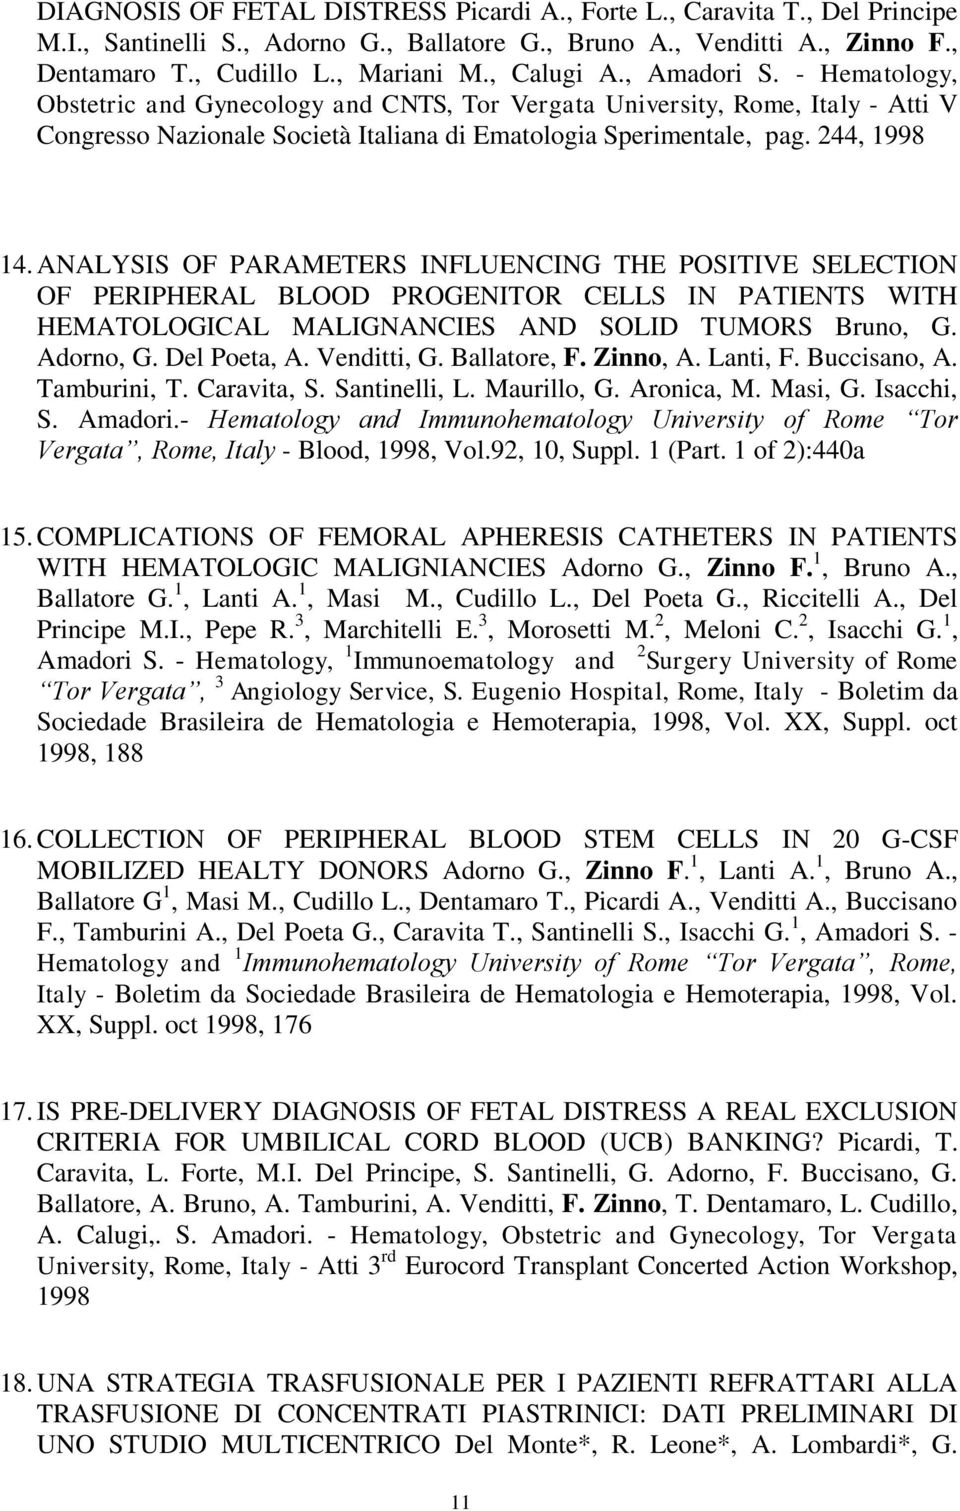 244, 1998 14. ANALYSIS OF PARAMETERS INFLUENCING THE POSITIVE SELECTION OF PERIPHERAL BLOOD PROGENITOR CELLS IN PATIENTS WITH HEMATOLOGICAL MALIGNANCIES AND SOLID TUMORS Bruno, G. Adorno, G.